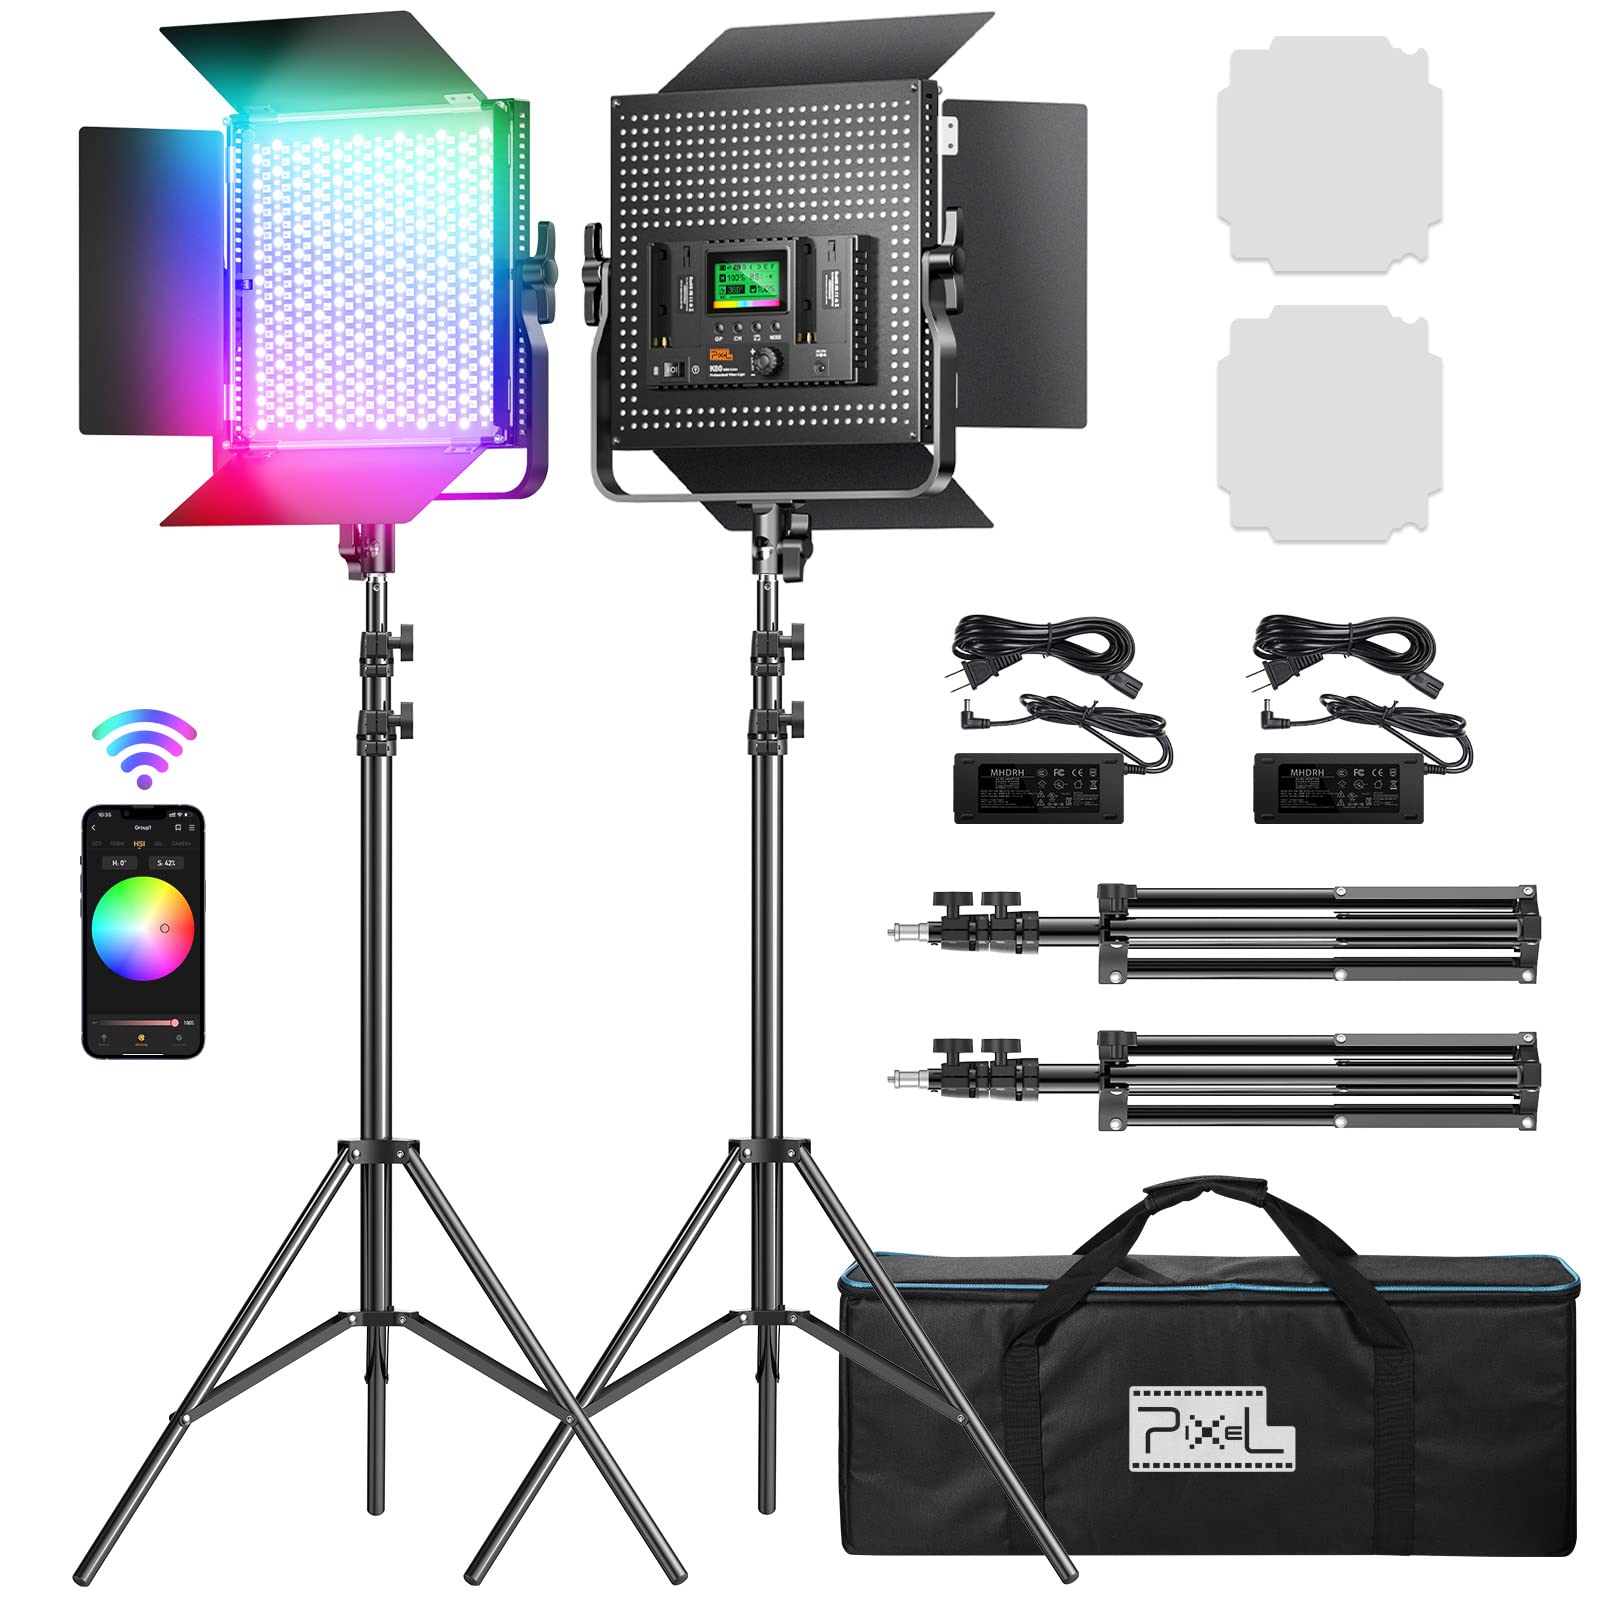 20% OFF CODE:Z47WNY8I Pixel K80 Photography Lighting with APP Control, 2600K-10000K CRI 97+ RGB Led Video Light Panel, 9 Applicable Scenes Lighting $238.23